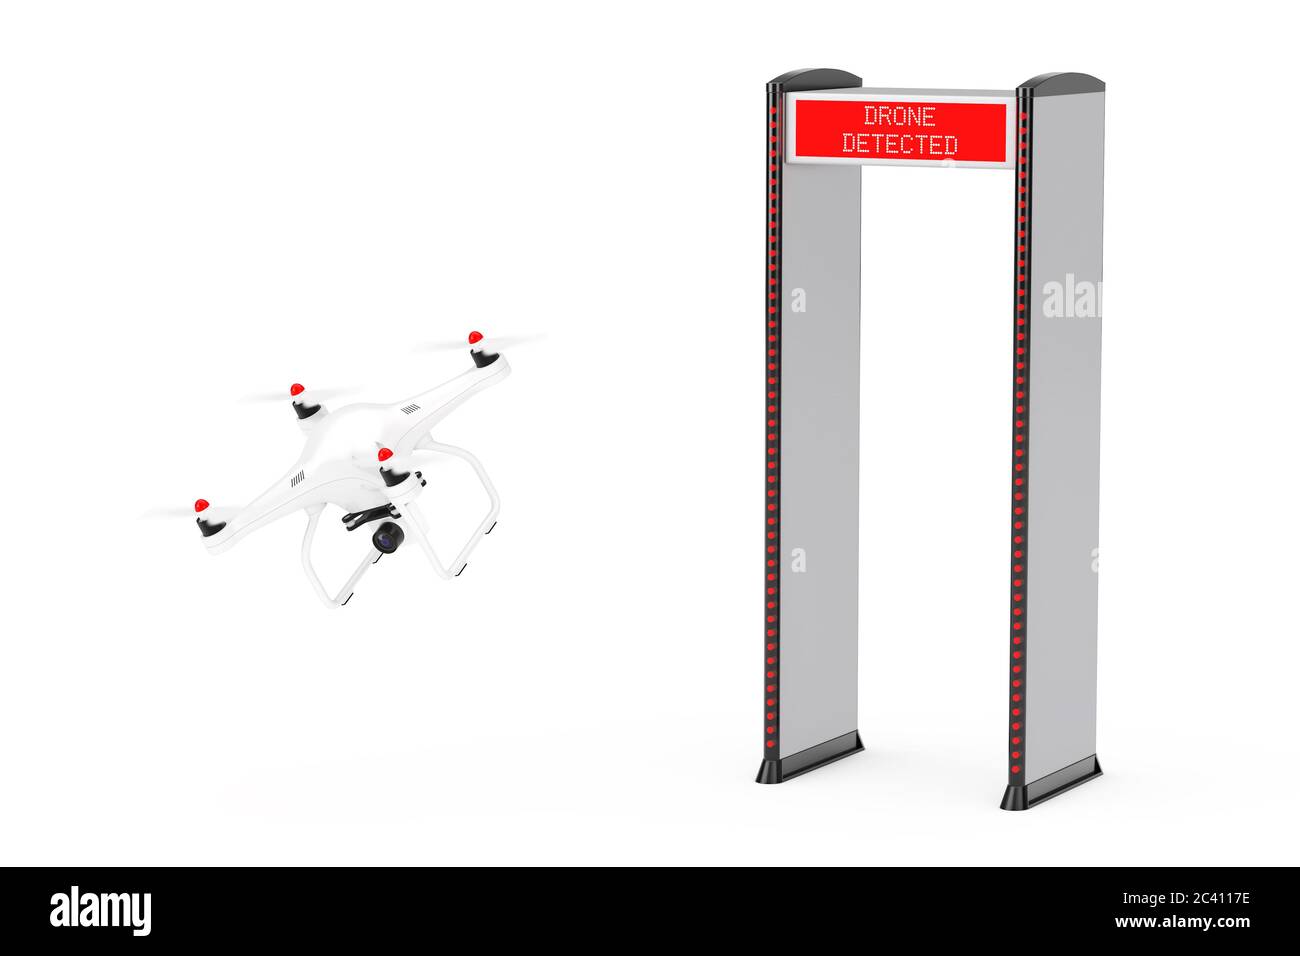 Safe Security Walkthrough Gates With Metal Detectors Detected Air Drone  with Camera on a white background. 3d Rendering Stock Photo - Alamy